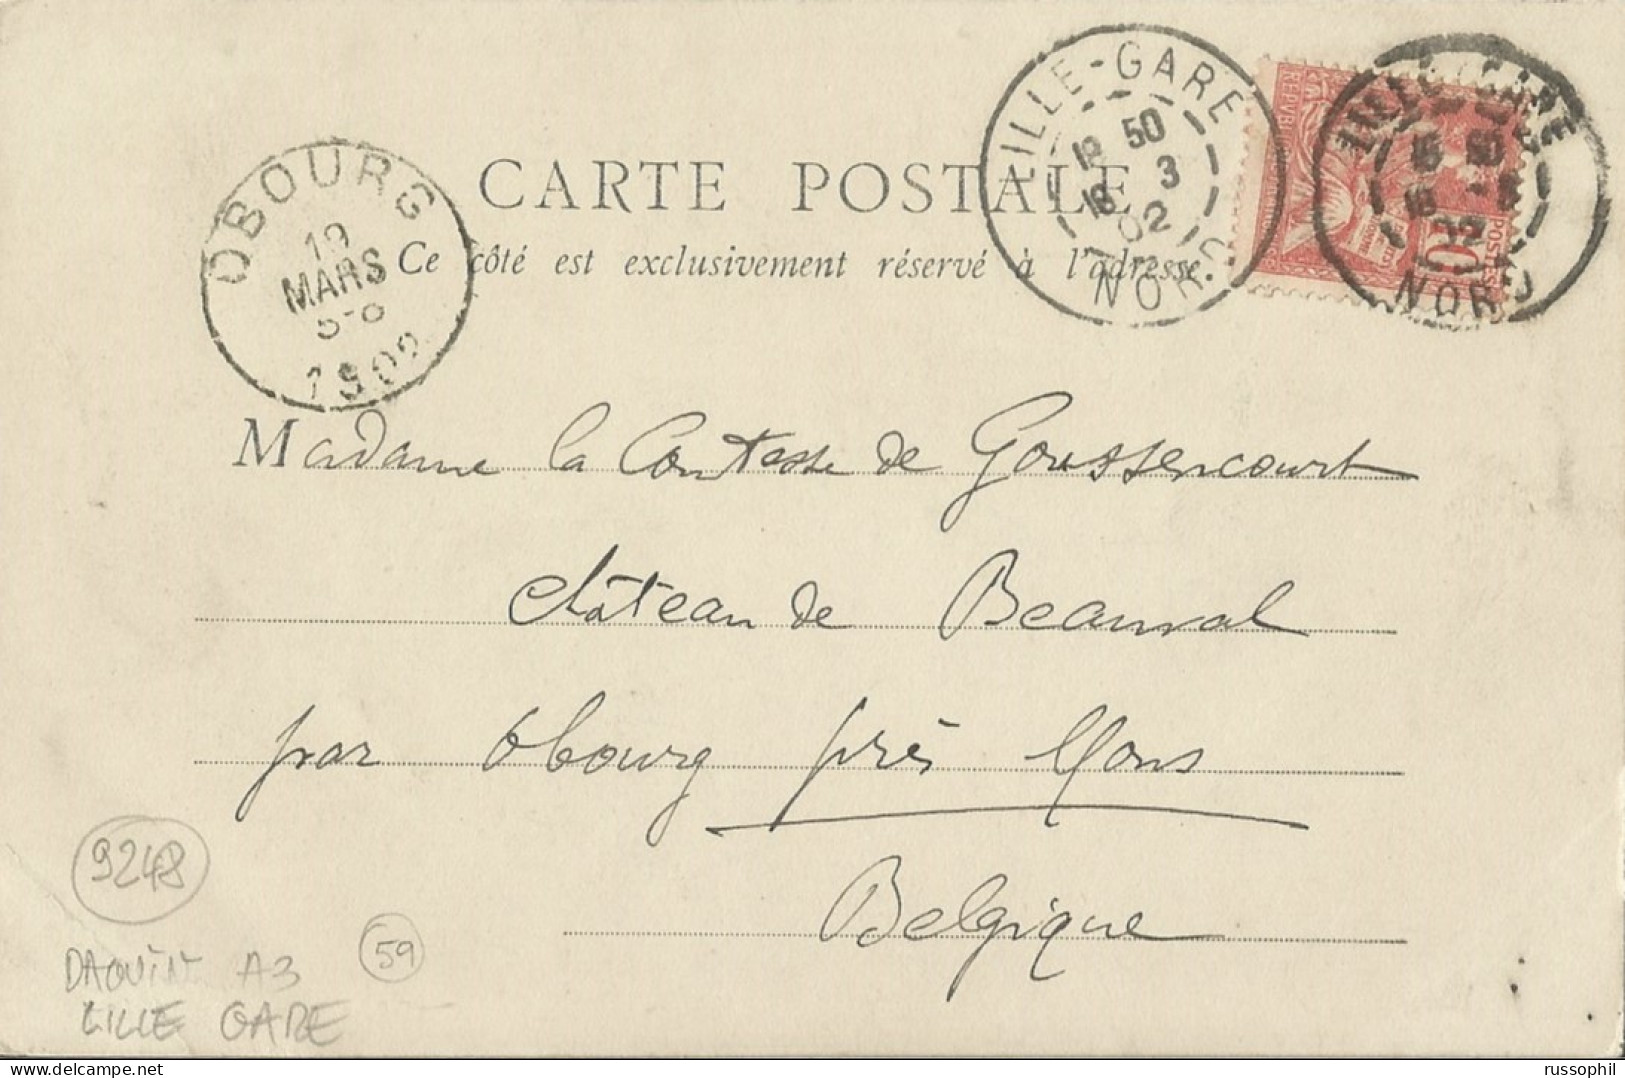 FRANCE - 59 - A3 PAIRED DAGUIN LIILE GARE - 1 CDS LARGE & 1 CDS SMALL CAPS LETTER - 1902 - Covers & Documents